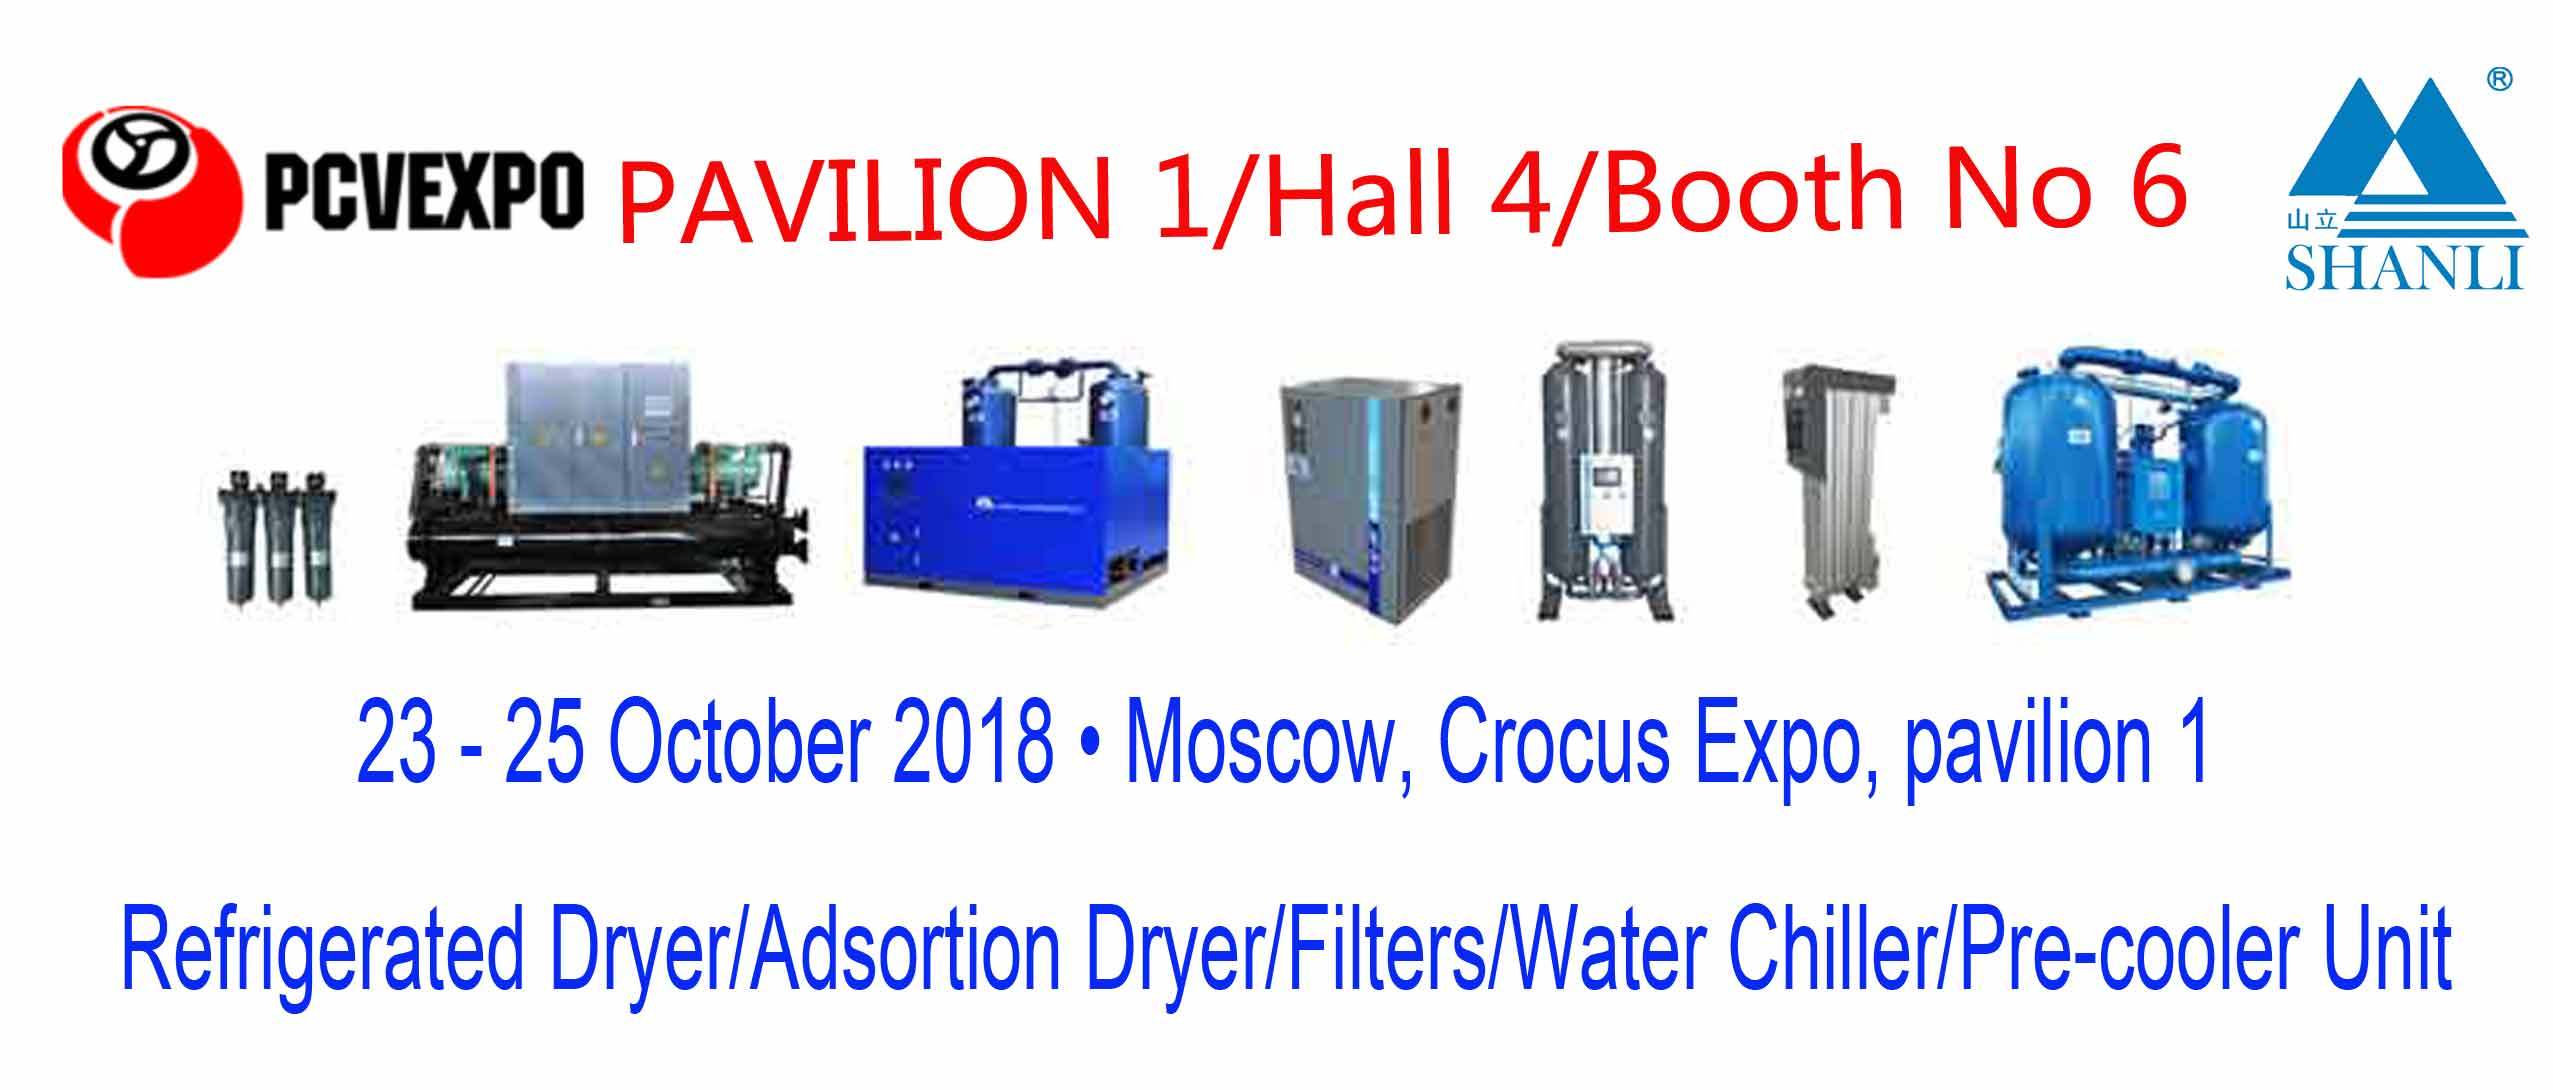 Shanli exhibition news — PCVExpo in Moscow Russia